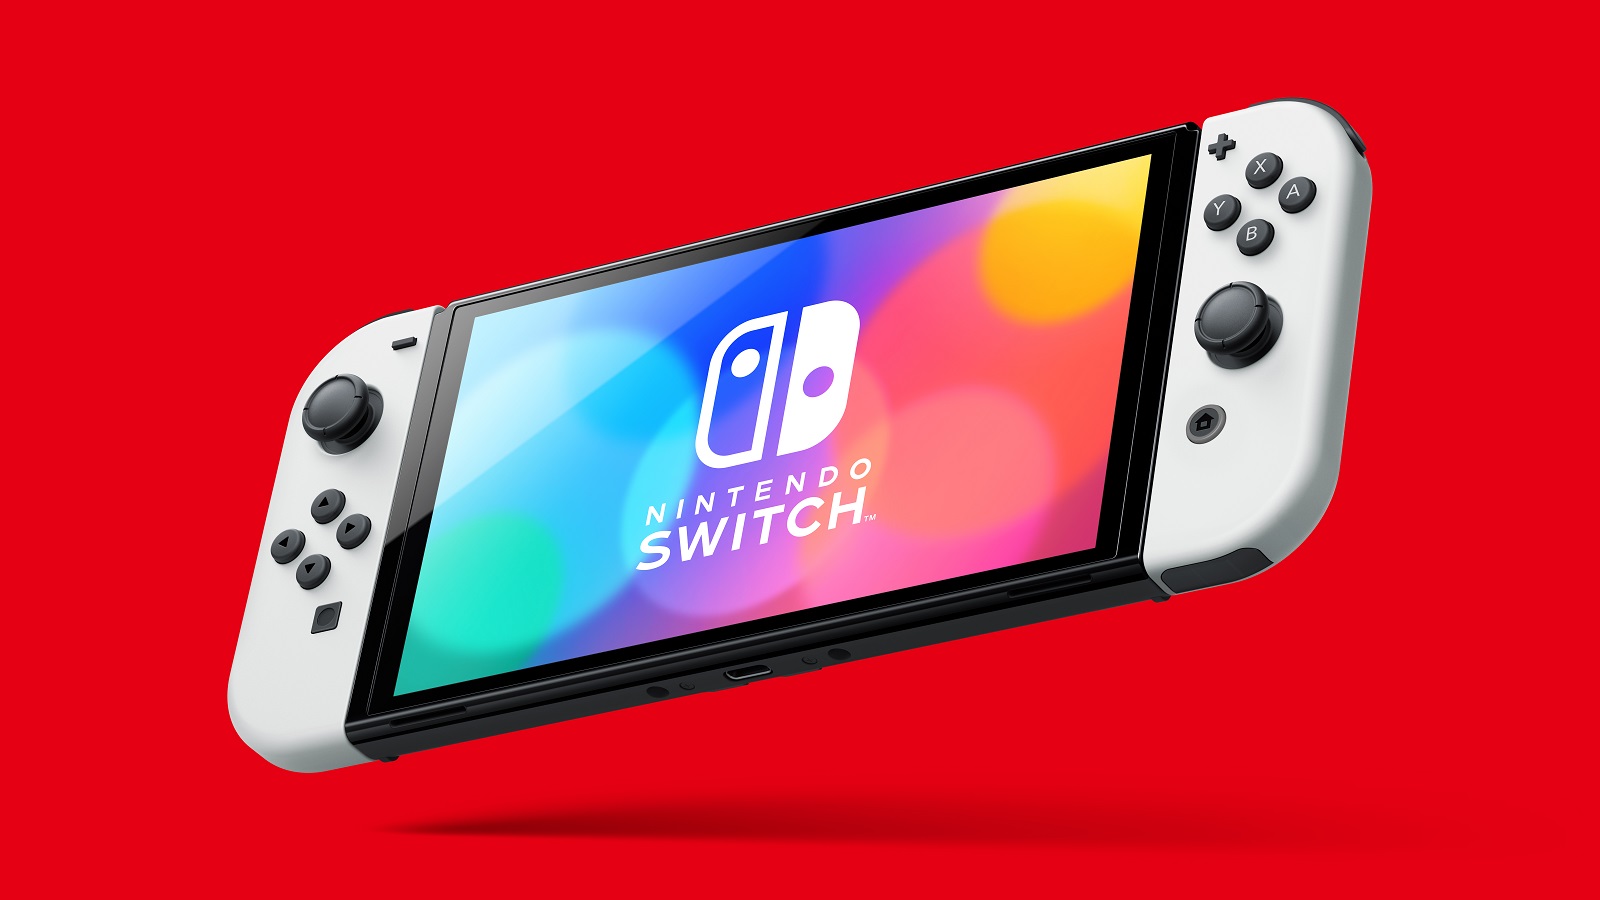 Nintendo Switch 2 might sacrifice portable power for better battery
life